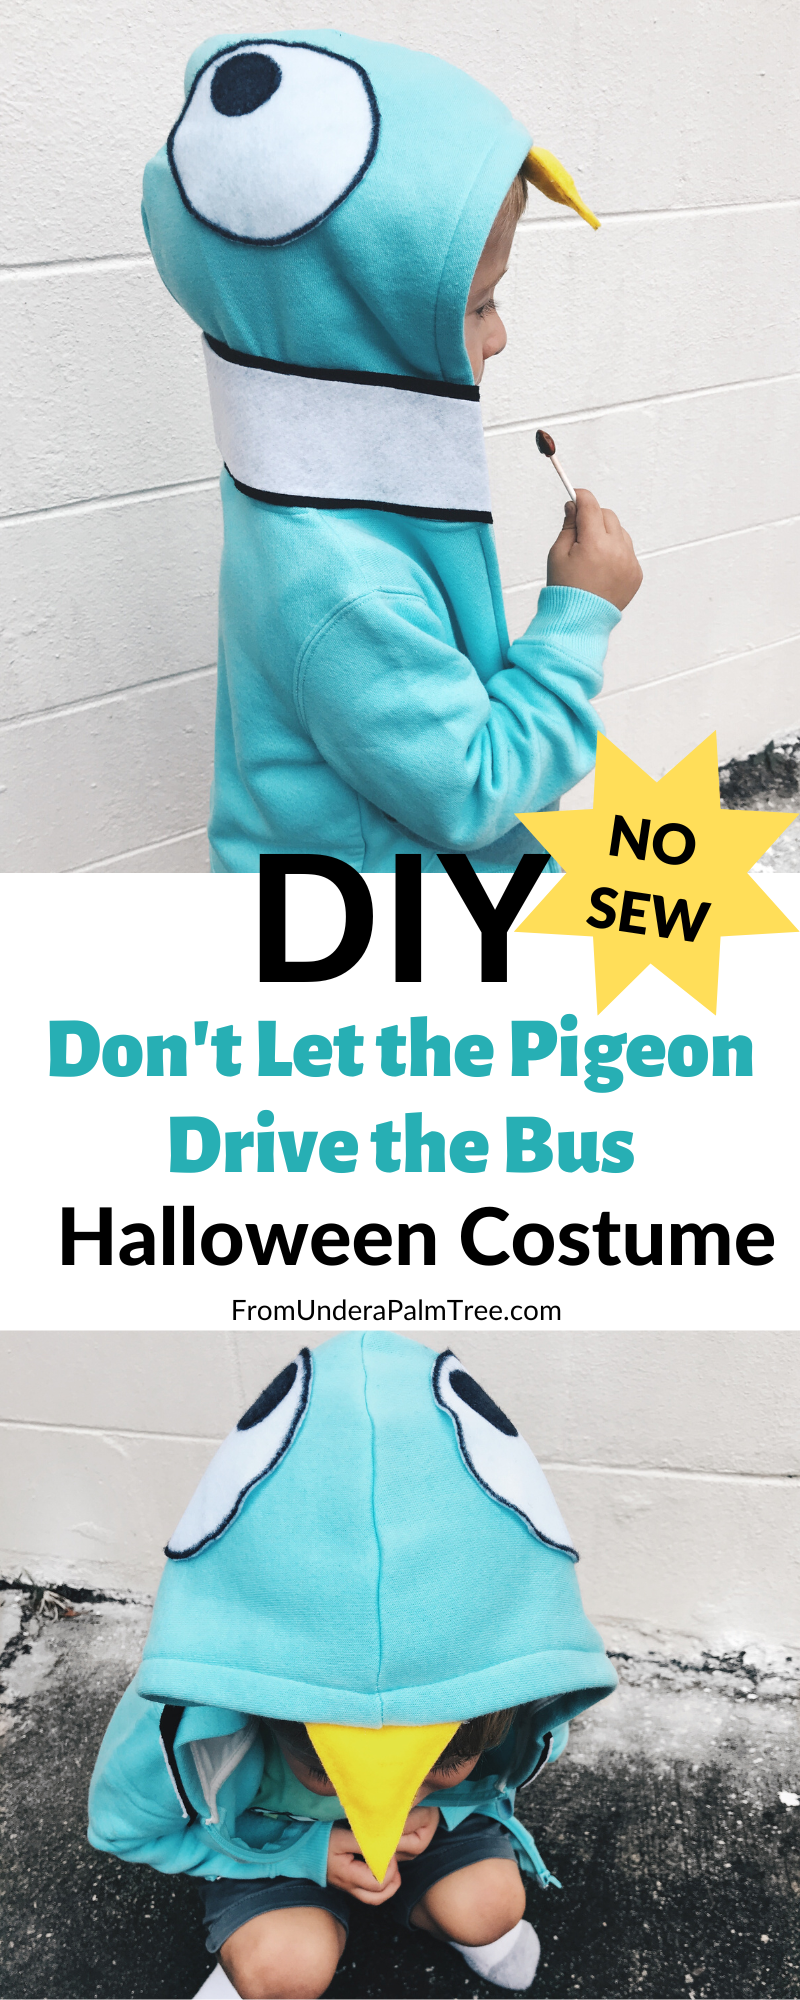 costumes for kids | kids costumes | DIY halloween costume | diy halloween costume | DIY kids costumes | DIY pigeon costume | don't let the pigeon drive the bus | mo willems | pigeon costume | literacy day costume | DIY literacy day costume | kids halloween costume